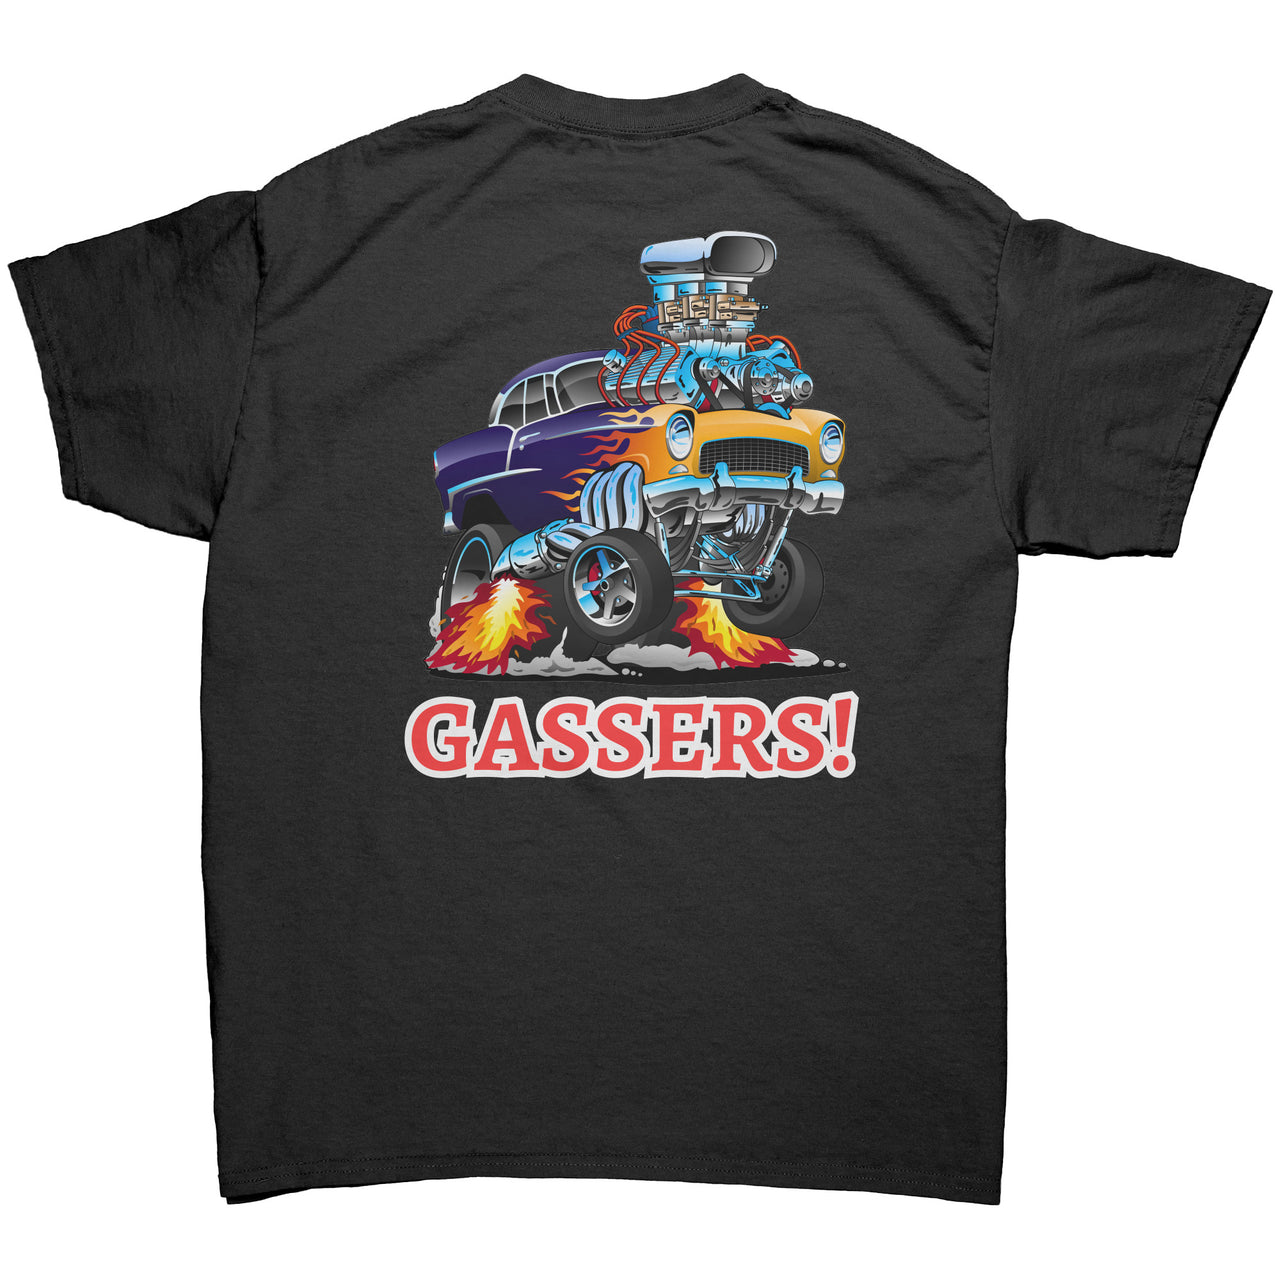 Gassers Men's T-Shirt Image On The Back